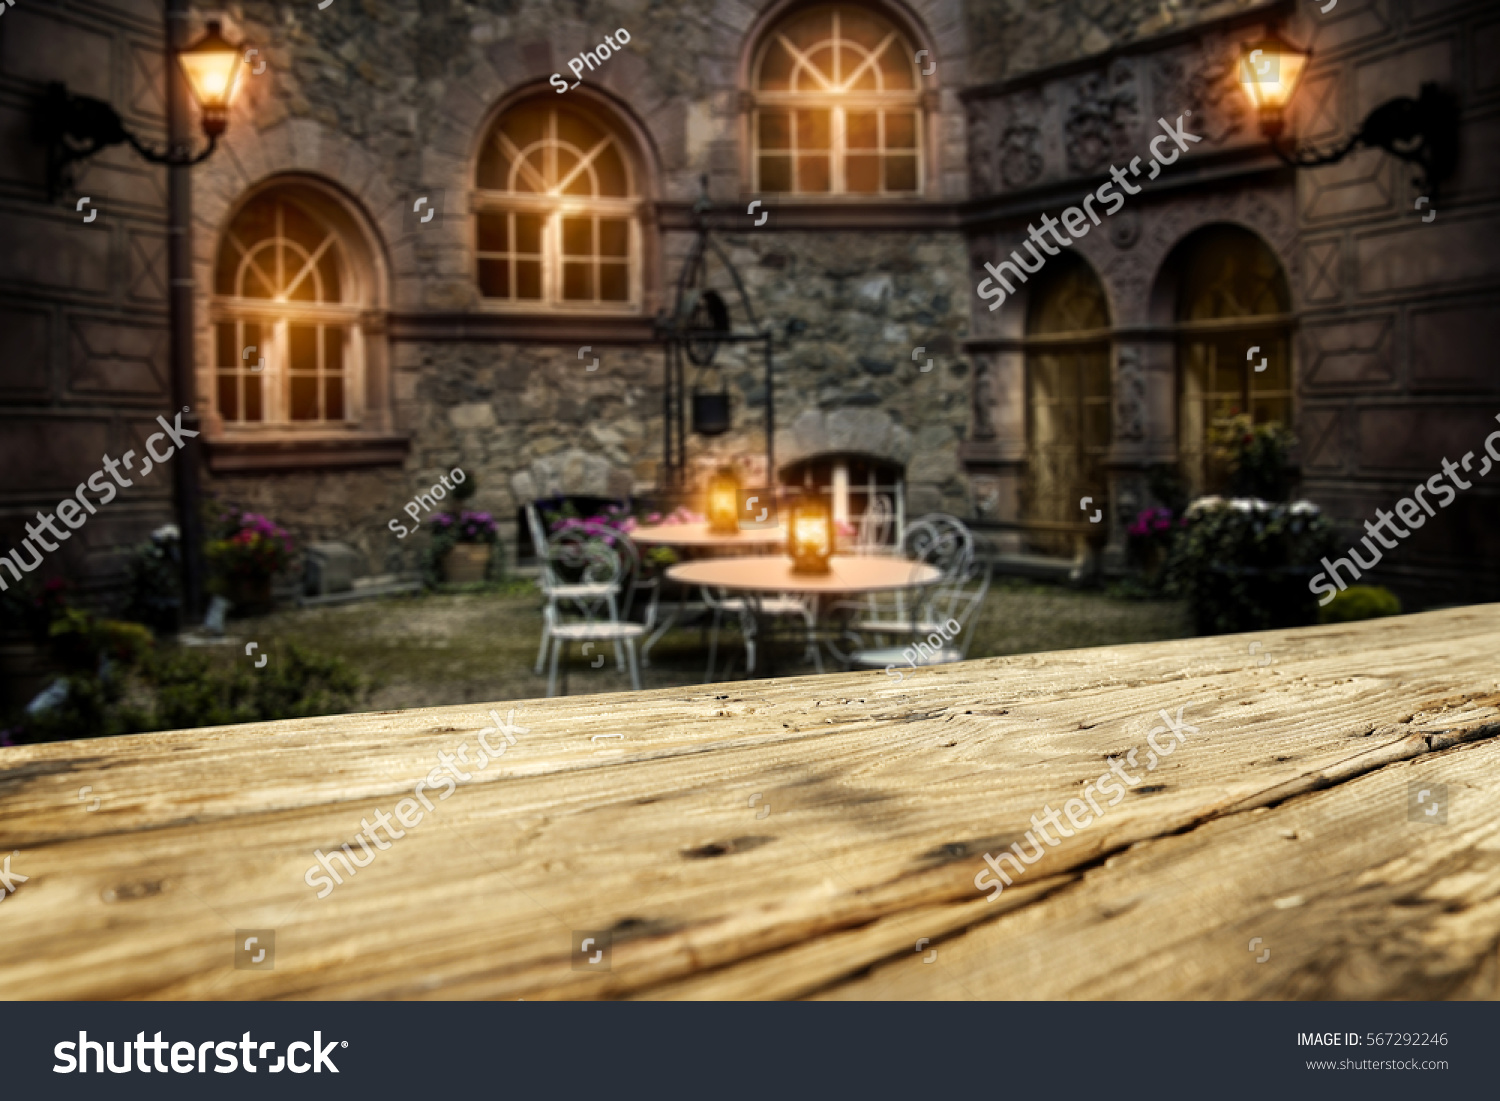 Edit Photos Free Online - Table background | Shutterstock Editor